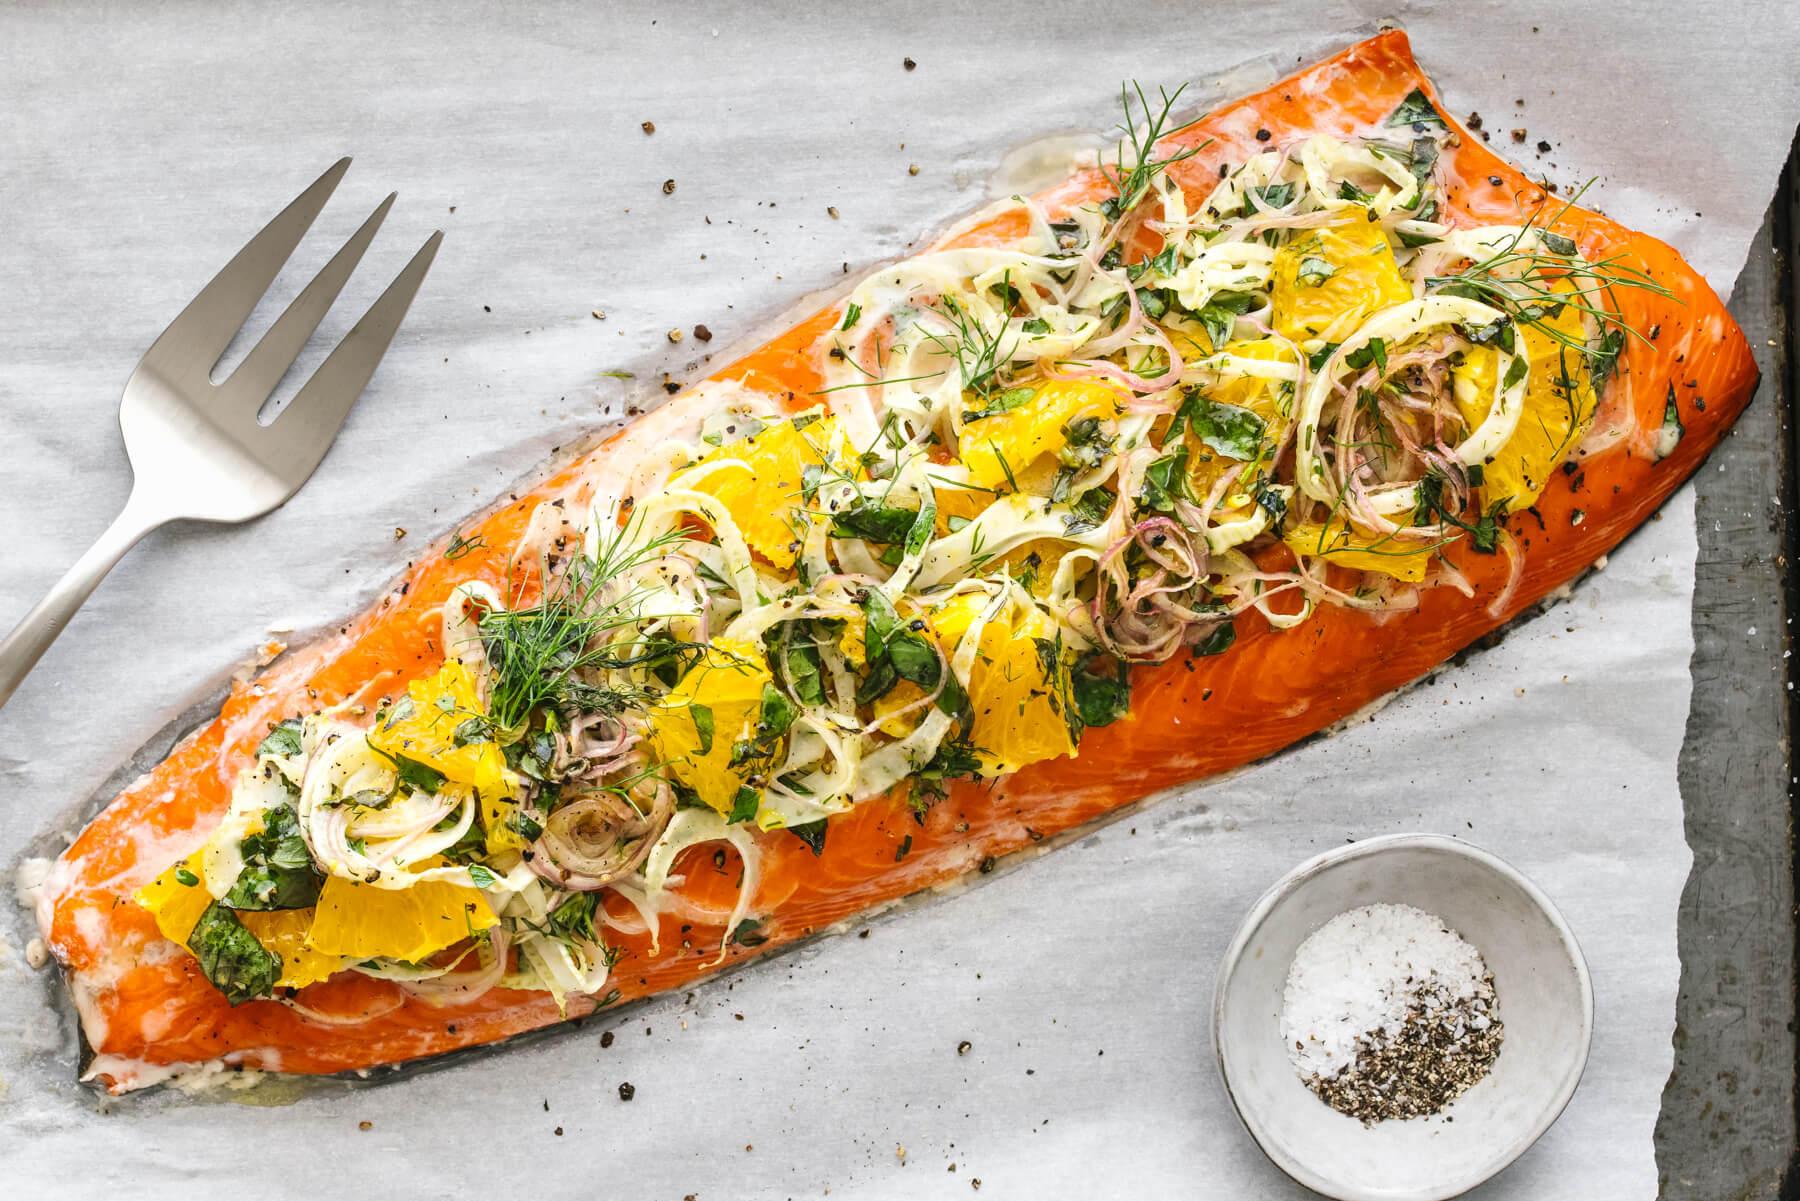 Slow Roasted Salmon with Fennel and Orange